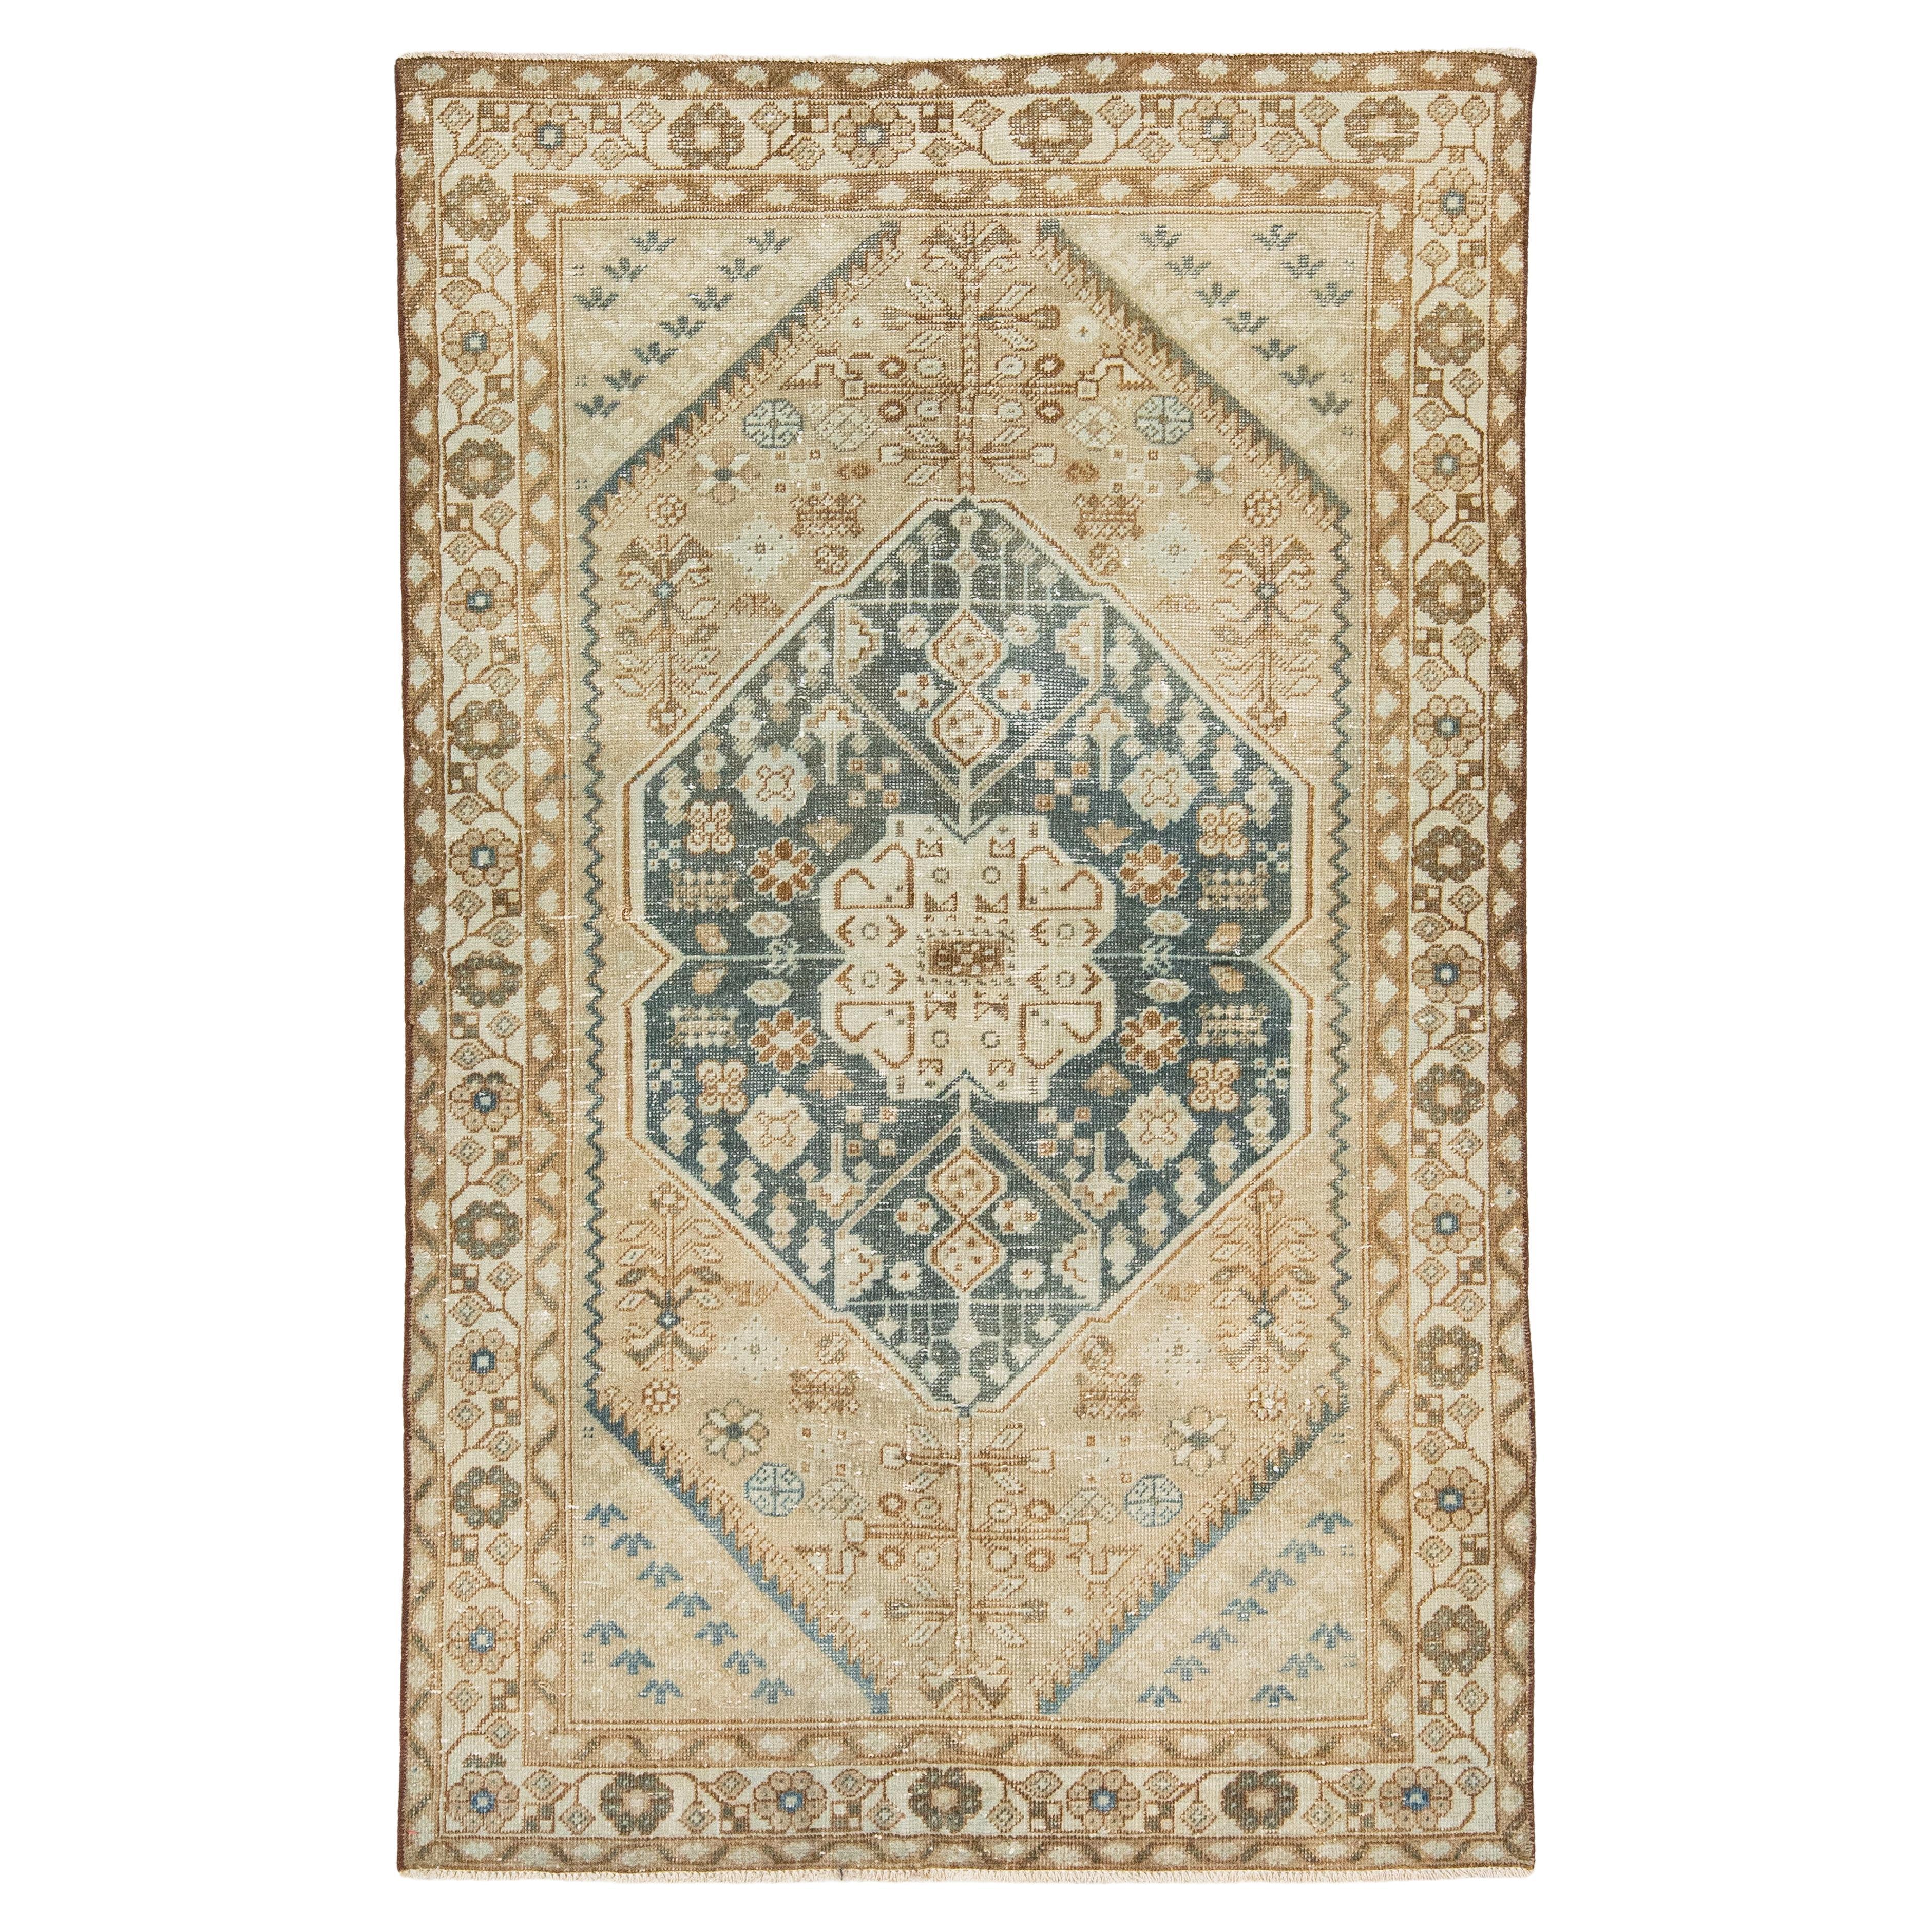 Antique Persian Shiraz Beige and Blue Wool Rug With Chic Design For Sale